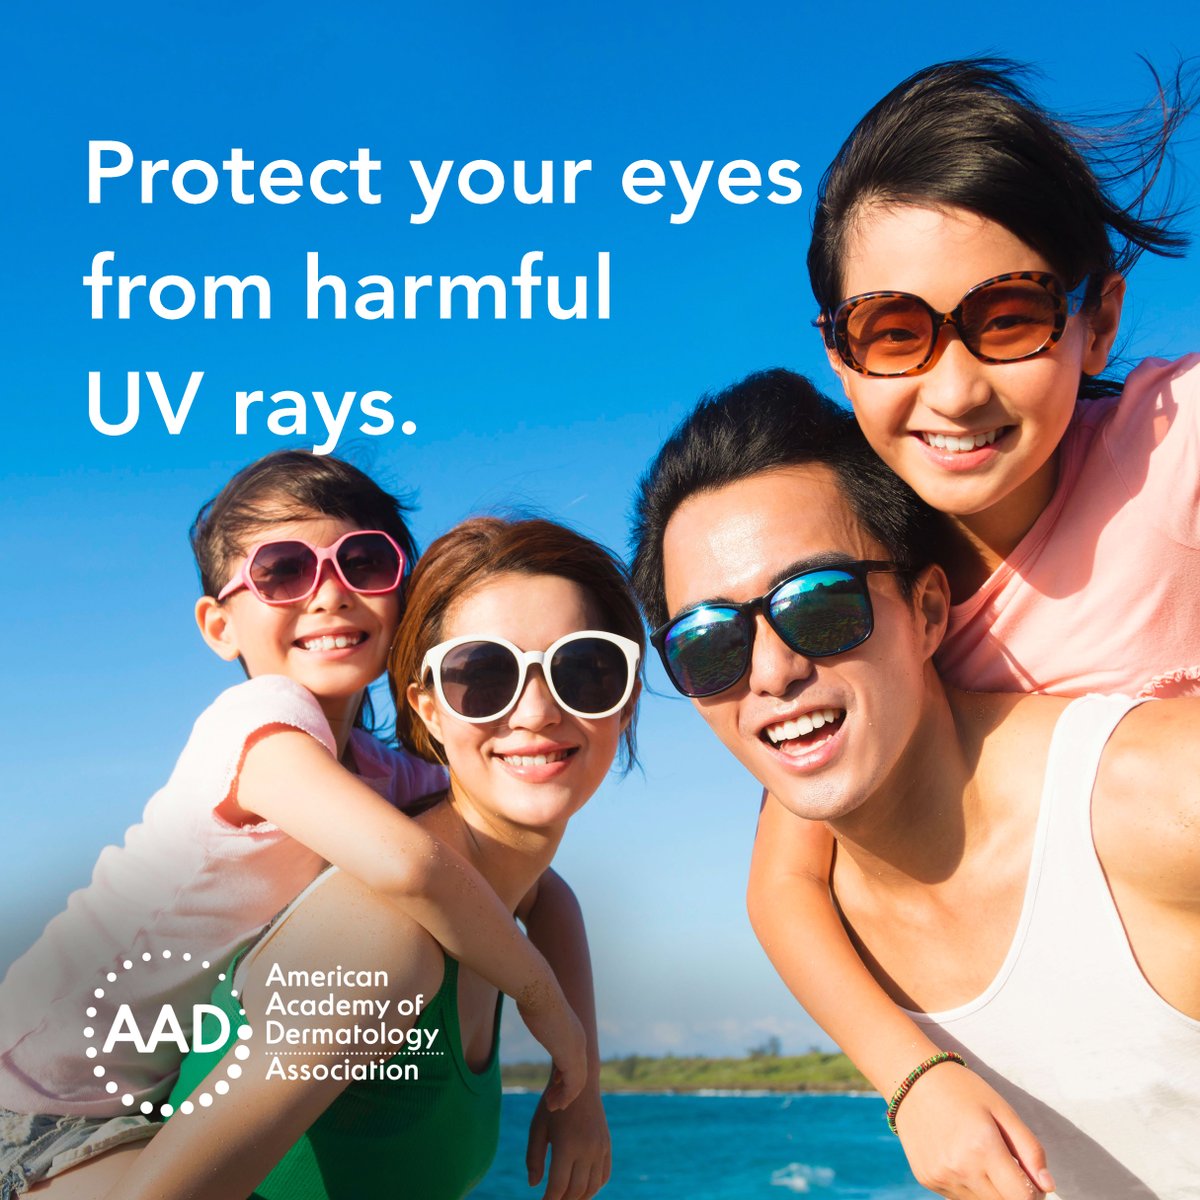 Sun protective clothing, including sunglasses, can help keep you stay protected from the sun’s UV rays. Look cool 😎 while you #PracticeSafeSun by rocking your shades this weekend #DontFryDay